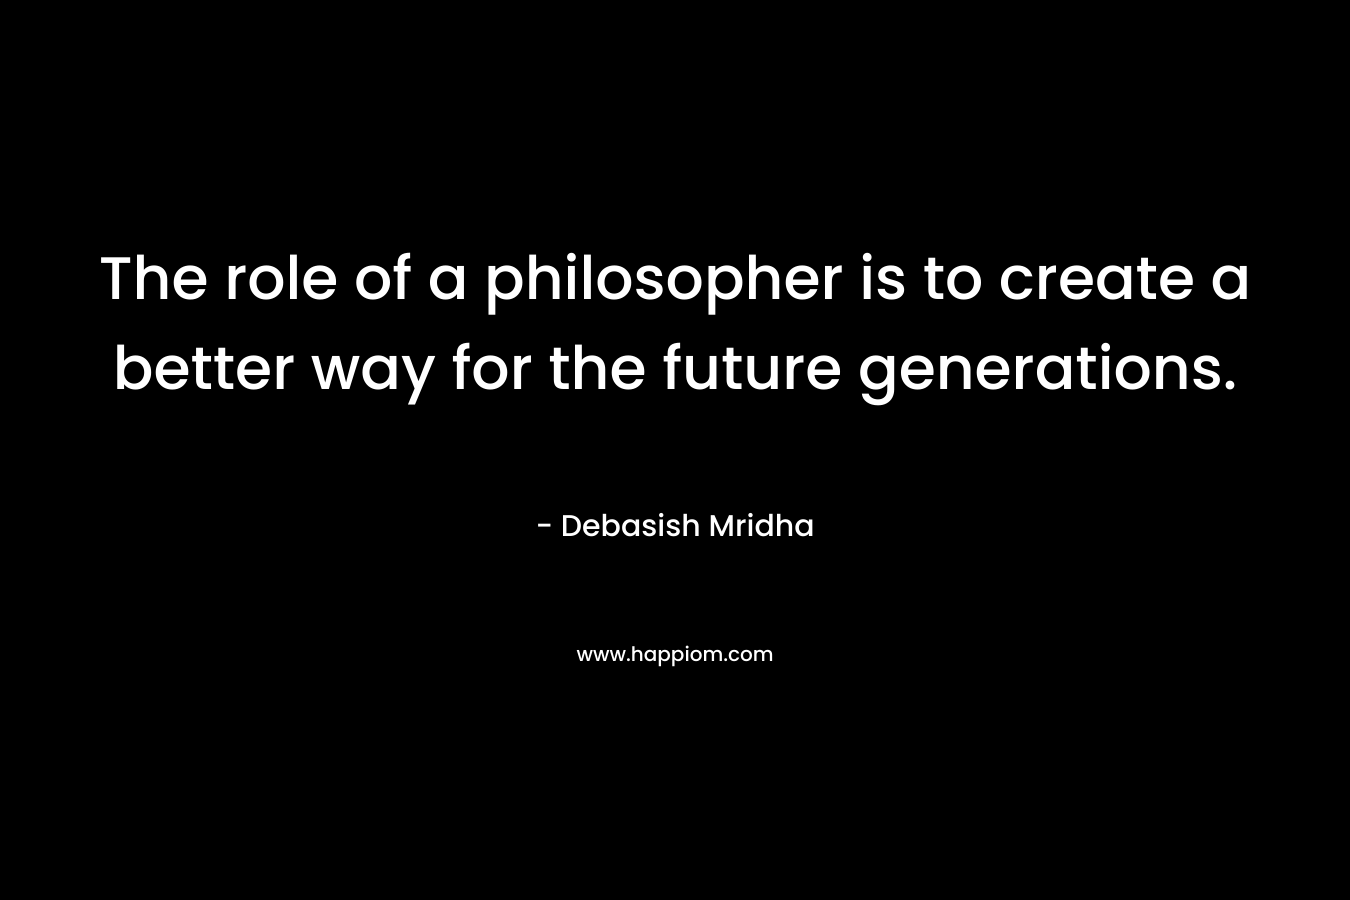 The role of a philosopher is to create a better way for the future generations. – Debasish Mridha